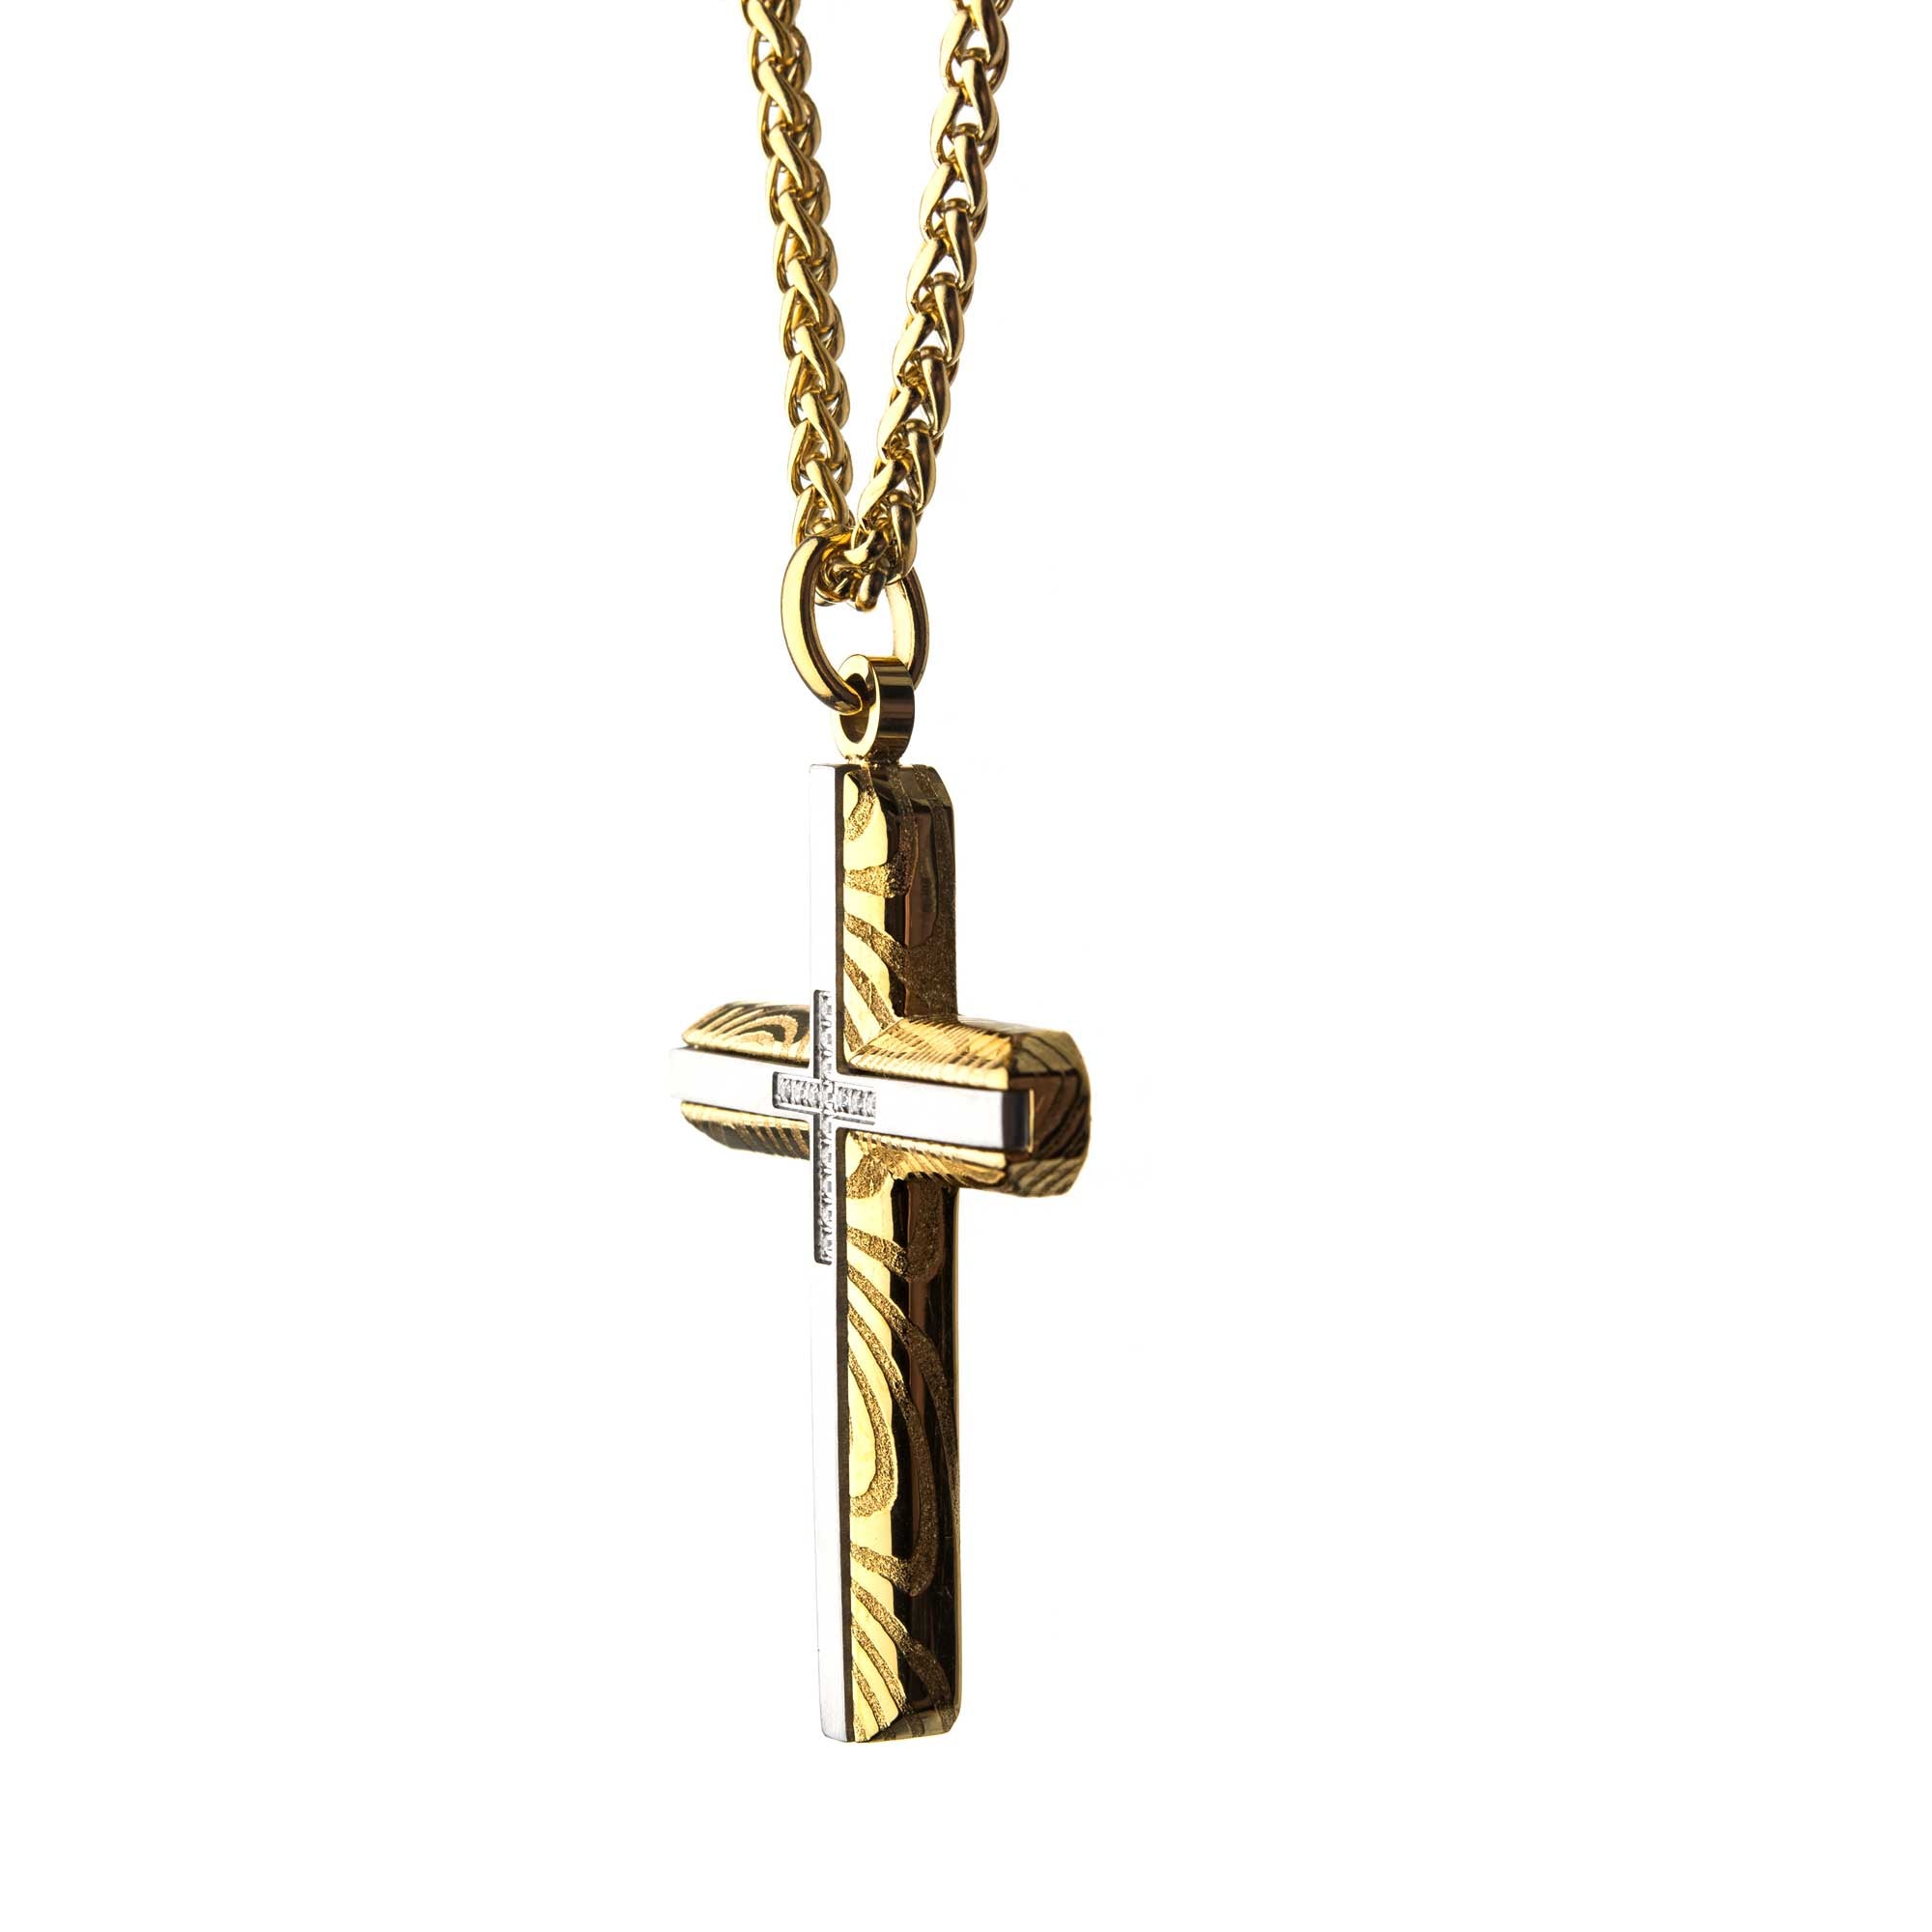 Stainless Steel & Gold Plated Damascus Cross Pendant with Chain